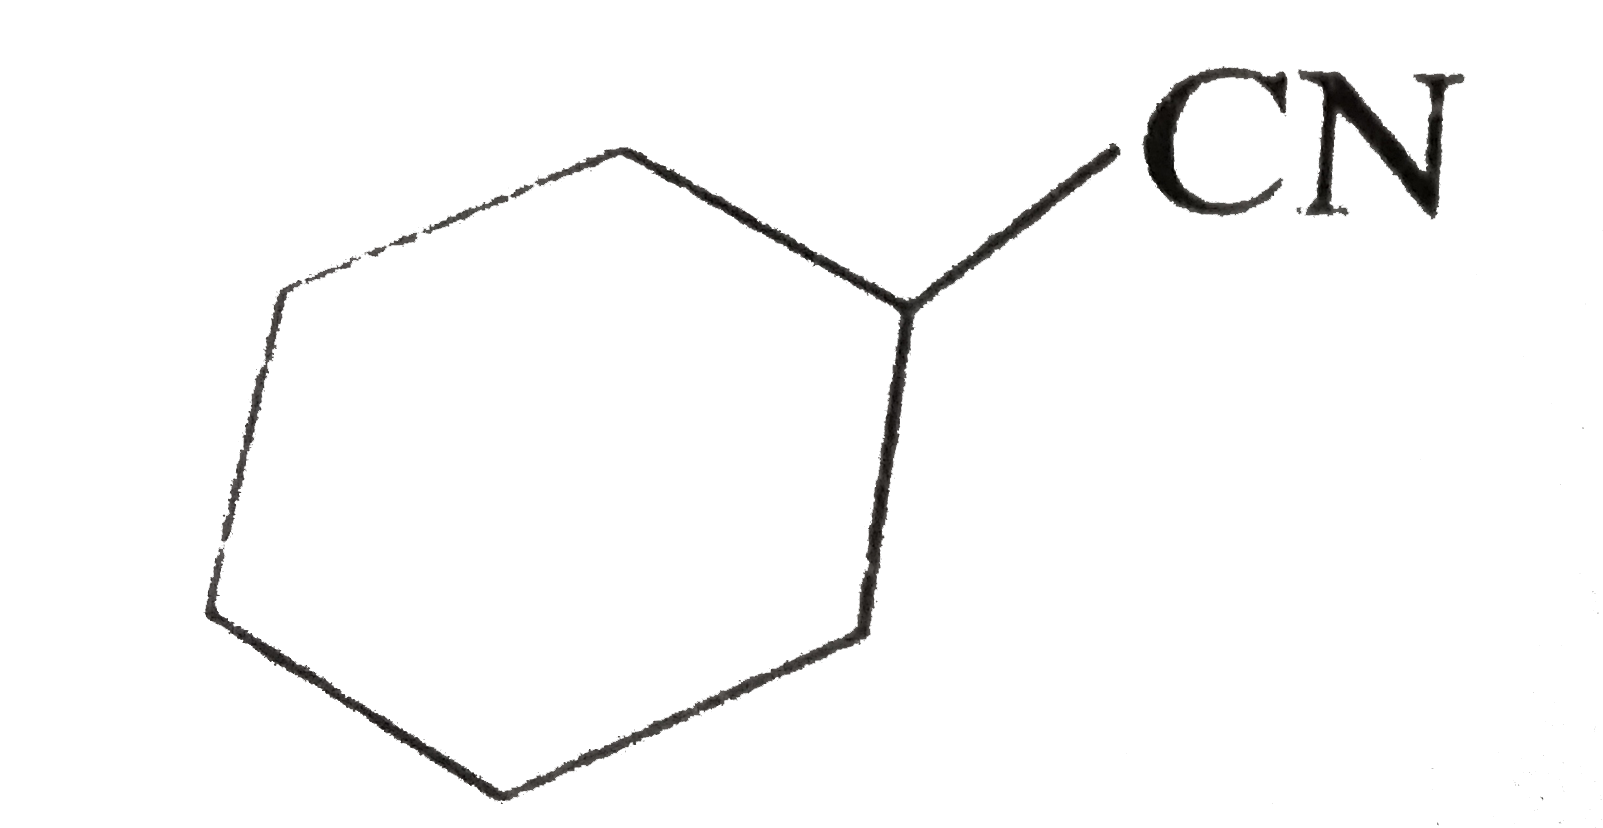 Devise synthesis of following compound from cyclohexene: